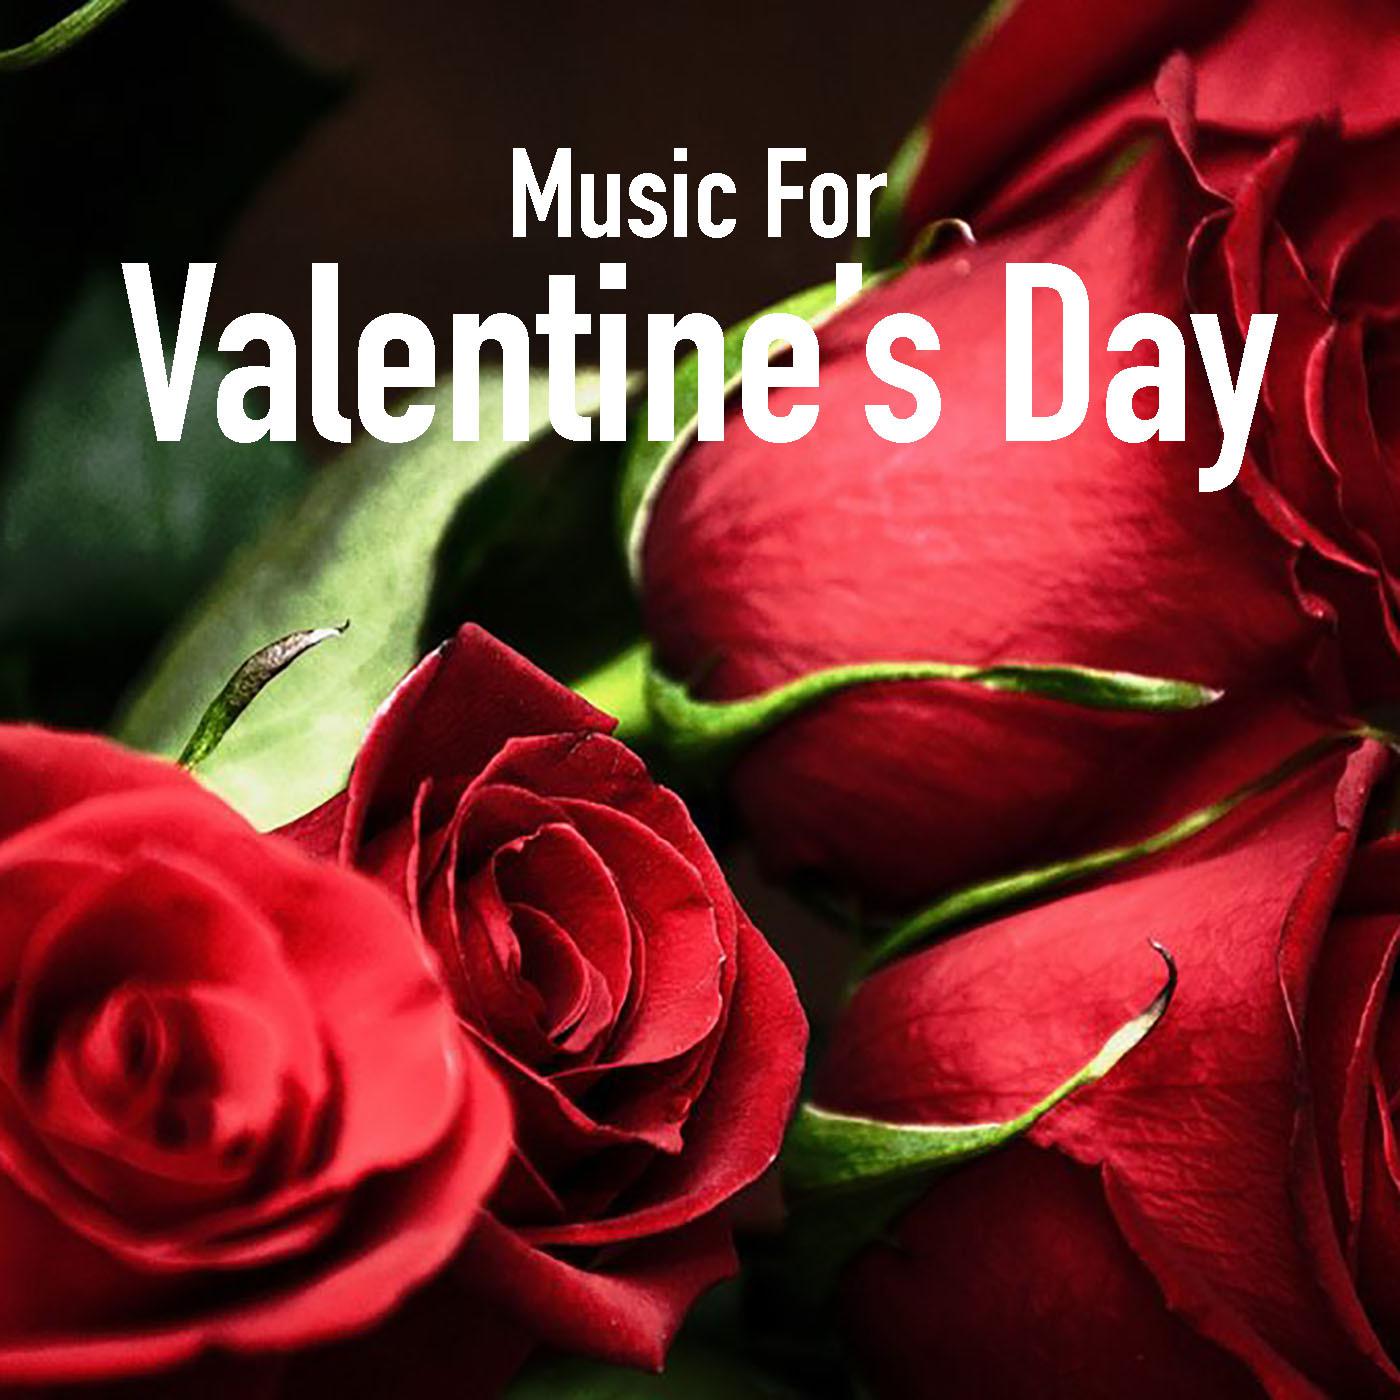 Music For Valentine's Day